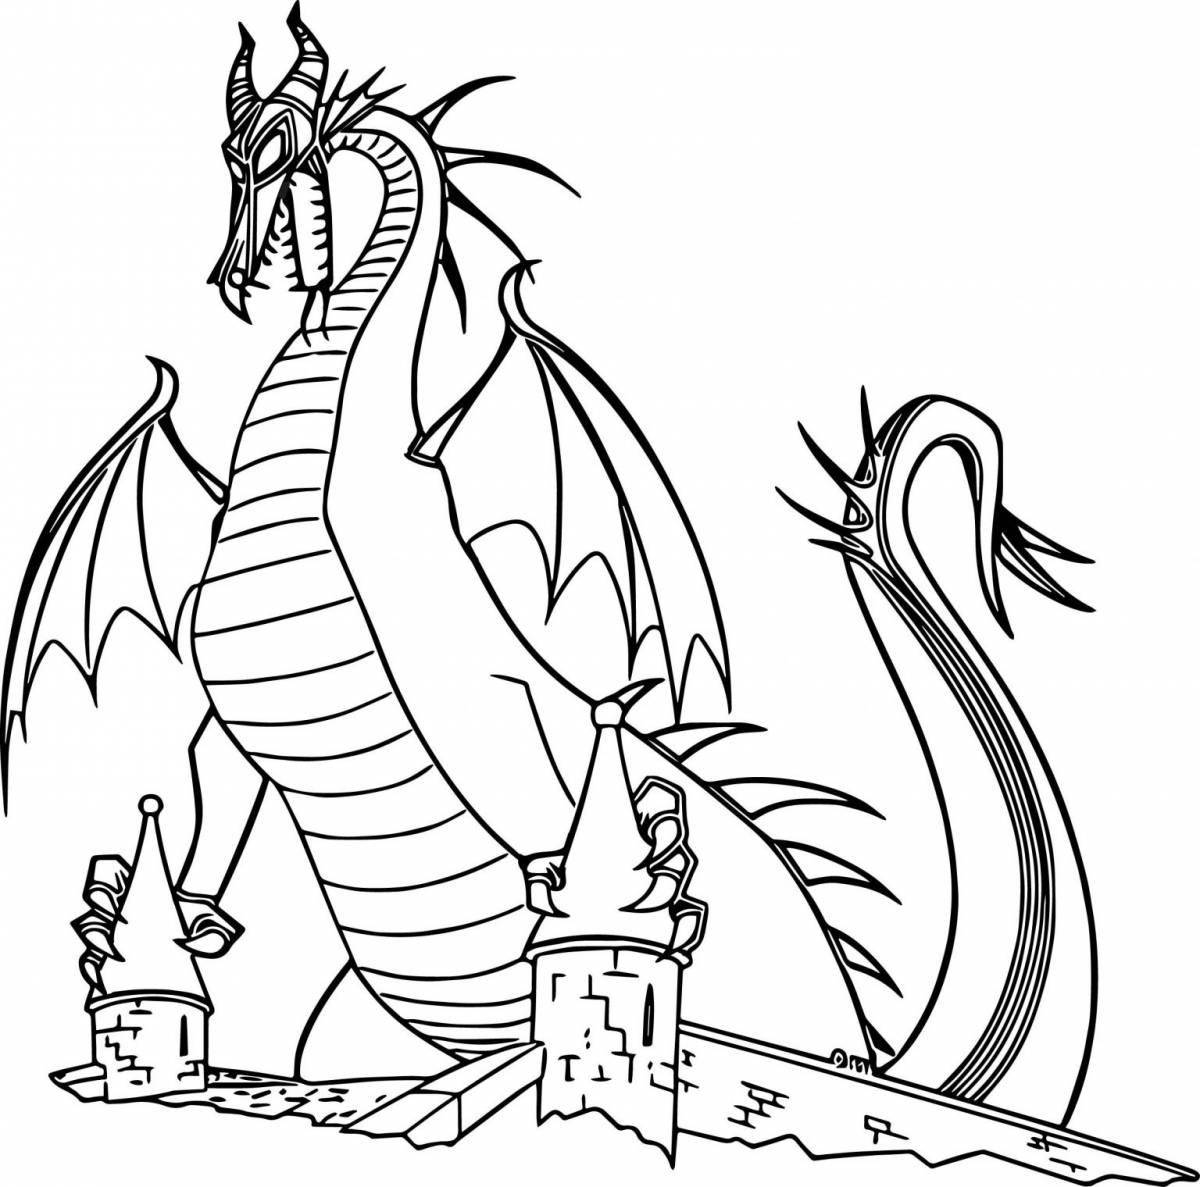 Creative coloring dragons for children 6-7 years old